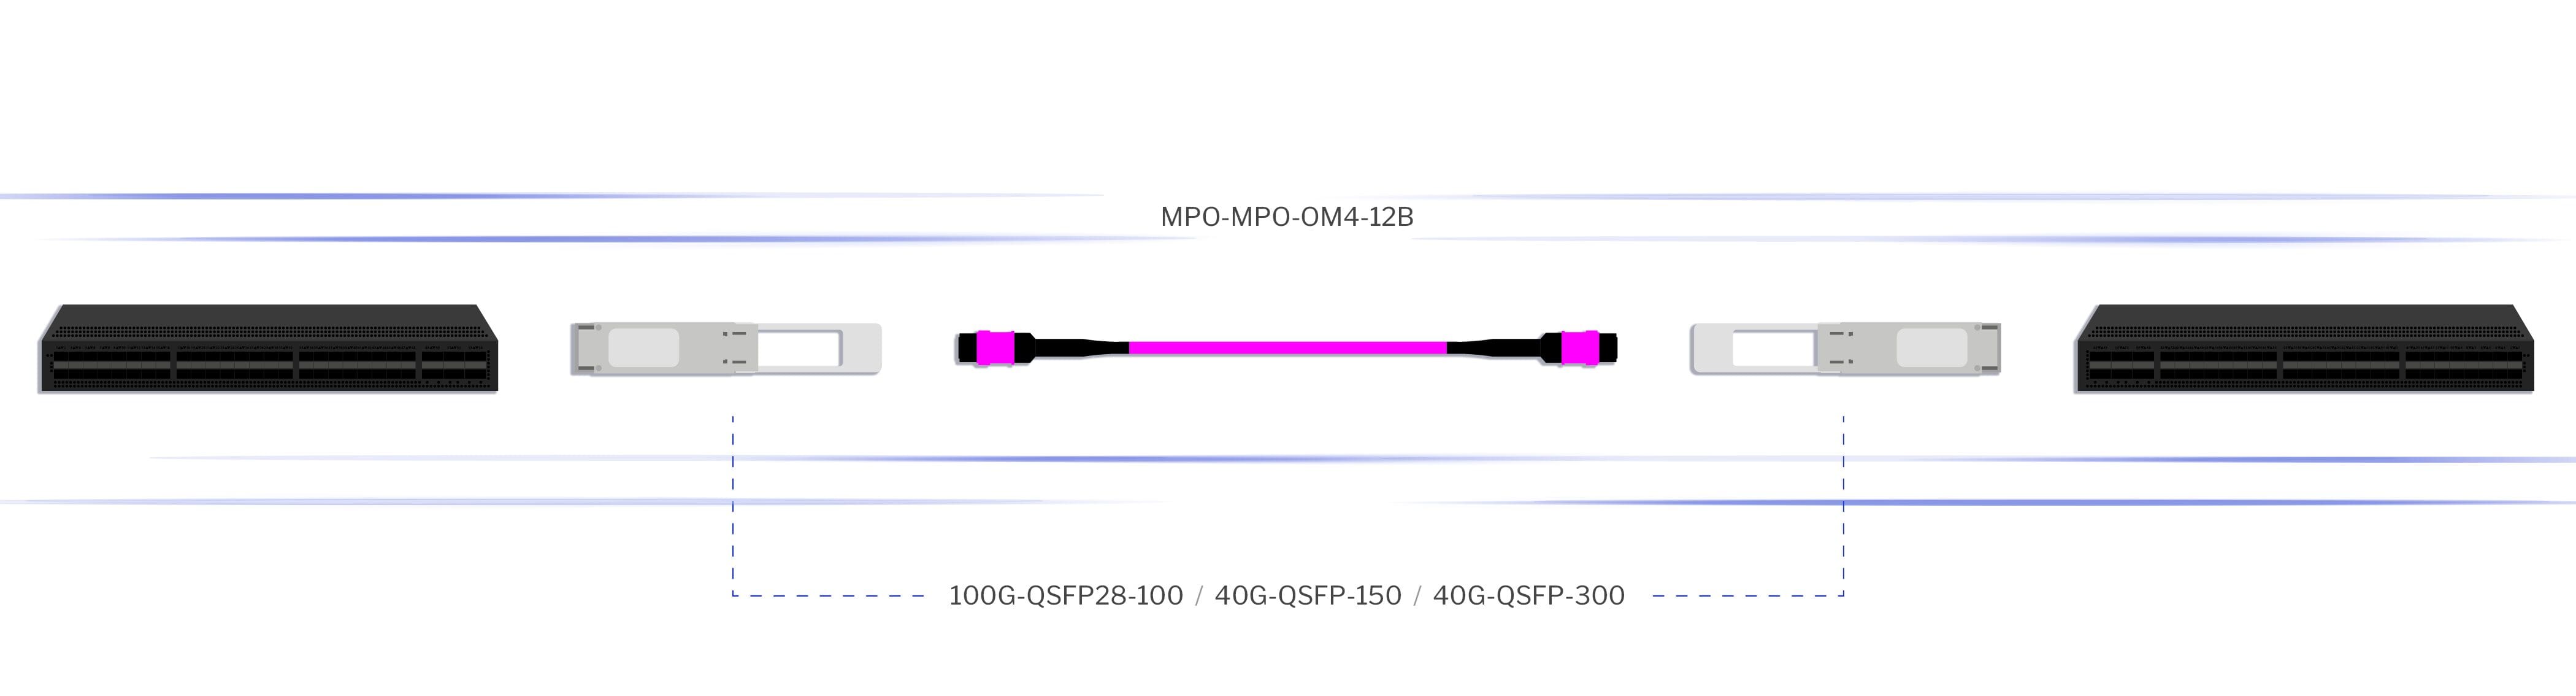 MPO-MPO-OM4-12B Patch Cable Connectivity Solution